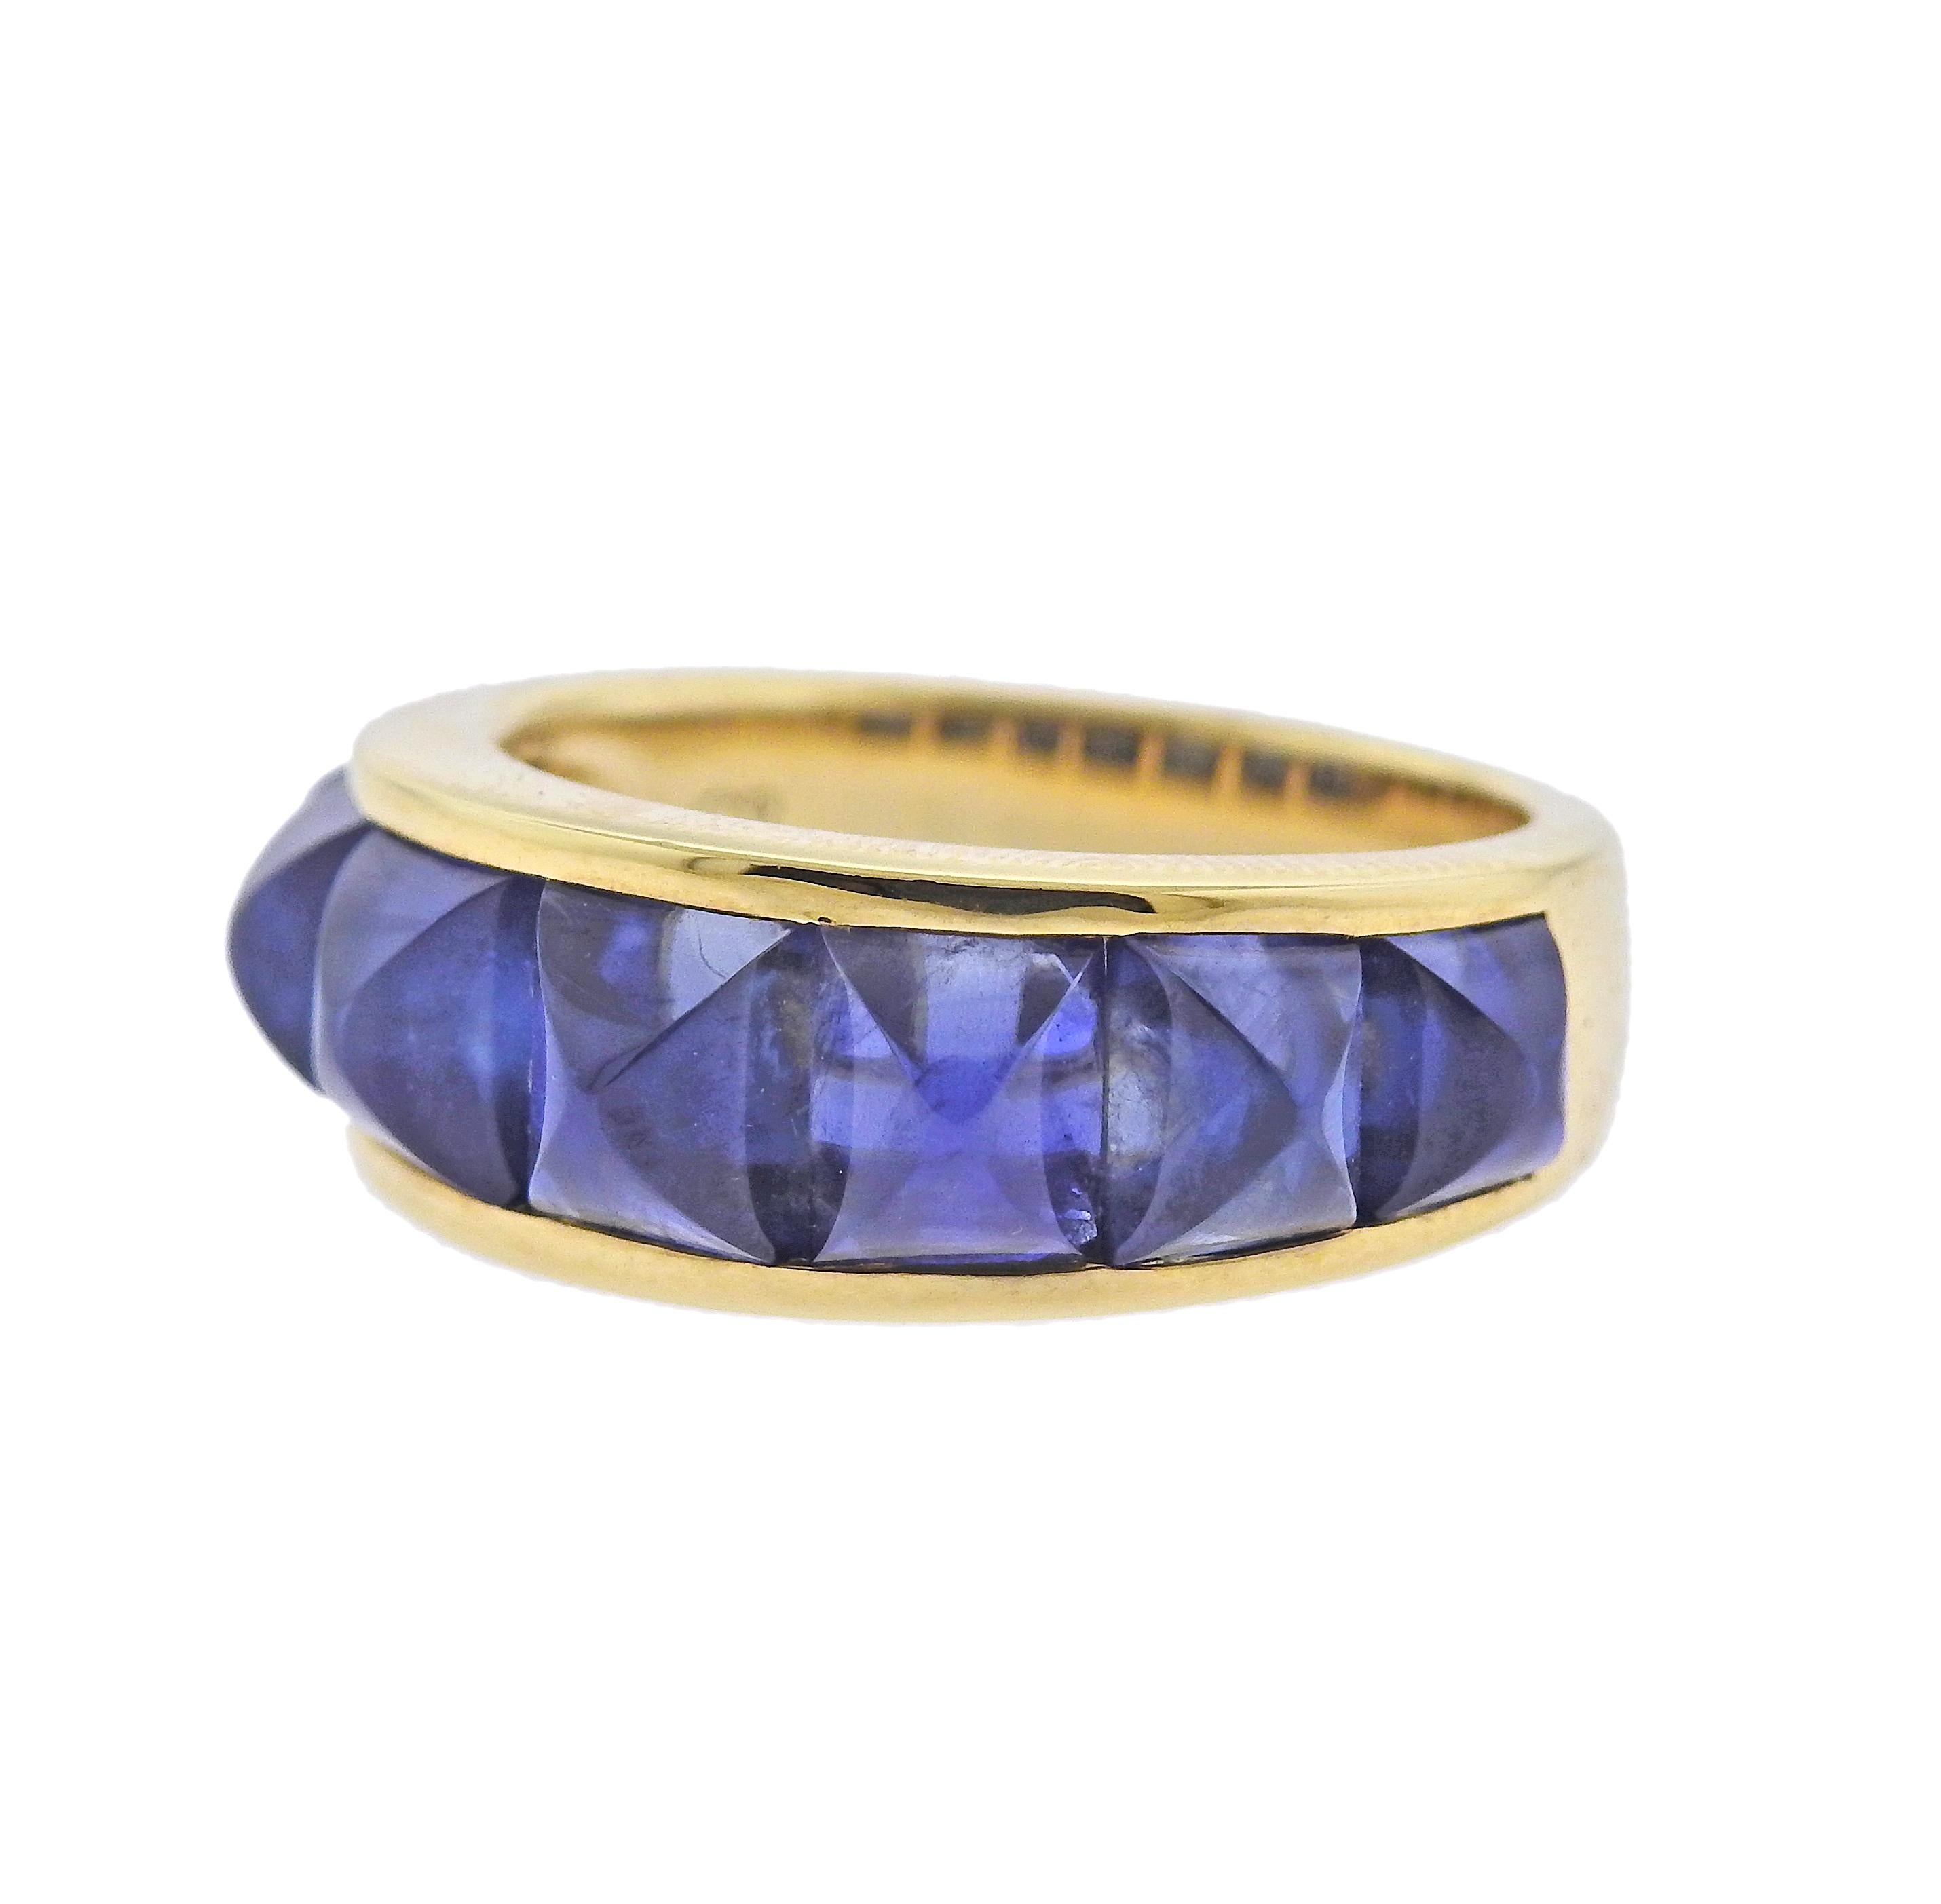 Brand new Seaman Schepps Portofino ring featuring sugarloaf blue sapphires. Ring size 8.25, width of the ring is 8.5mm. Marked: Shell mark, 750,245986. Weight is 9.6 grams.